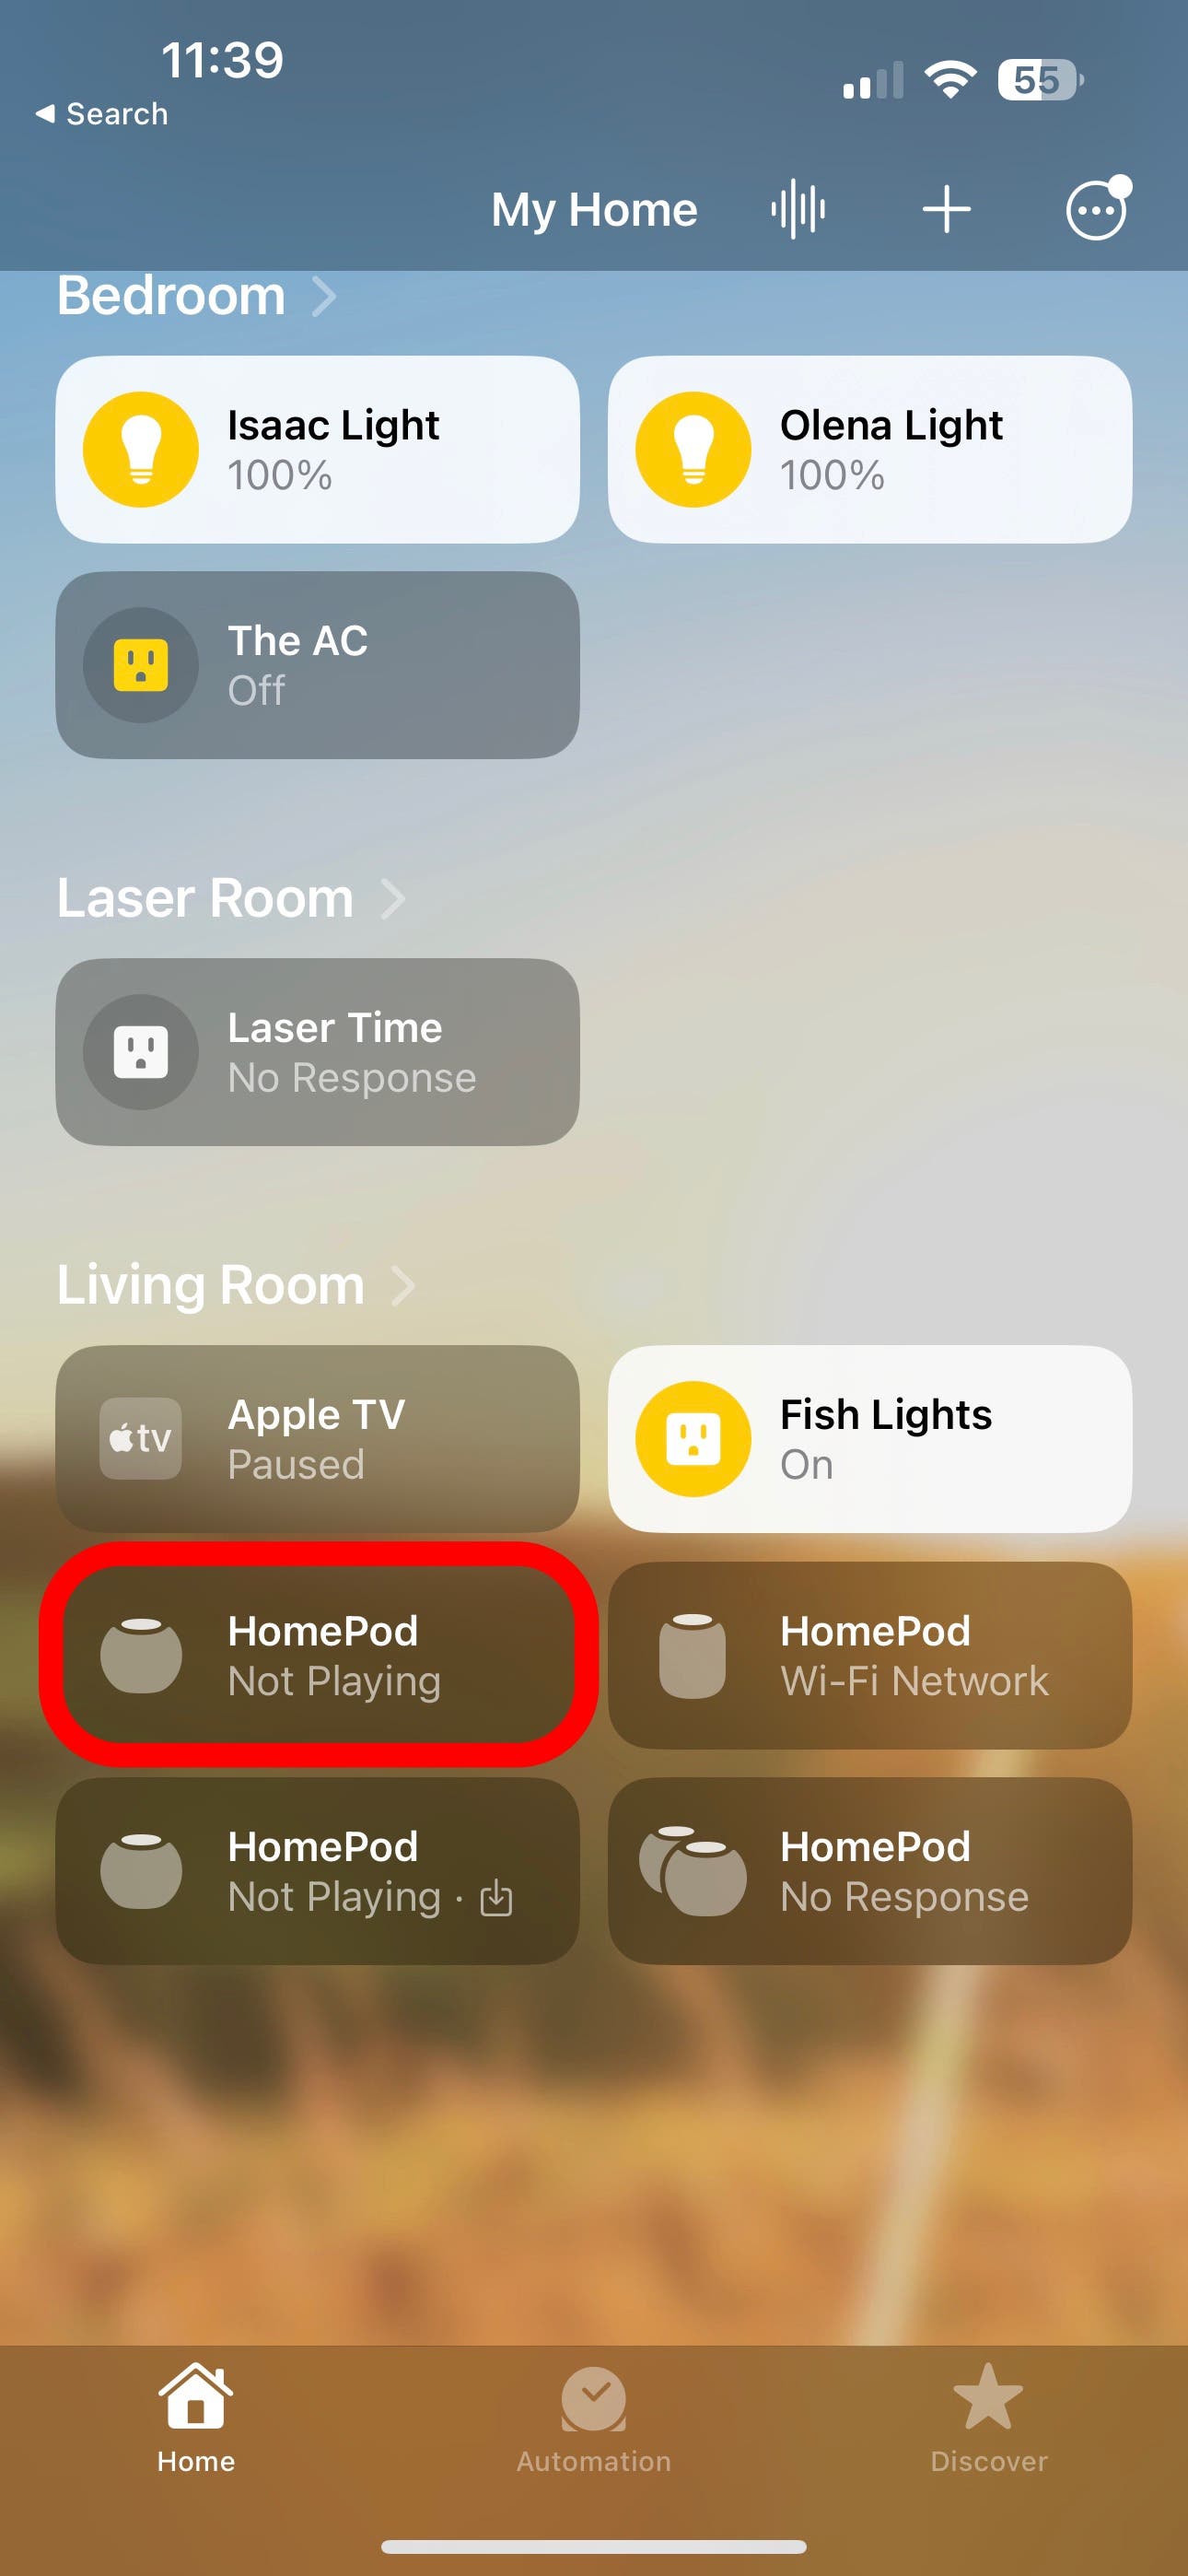 How to reset HomePod and HomePod mini